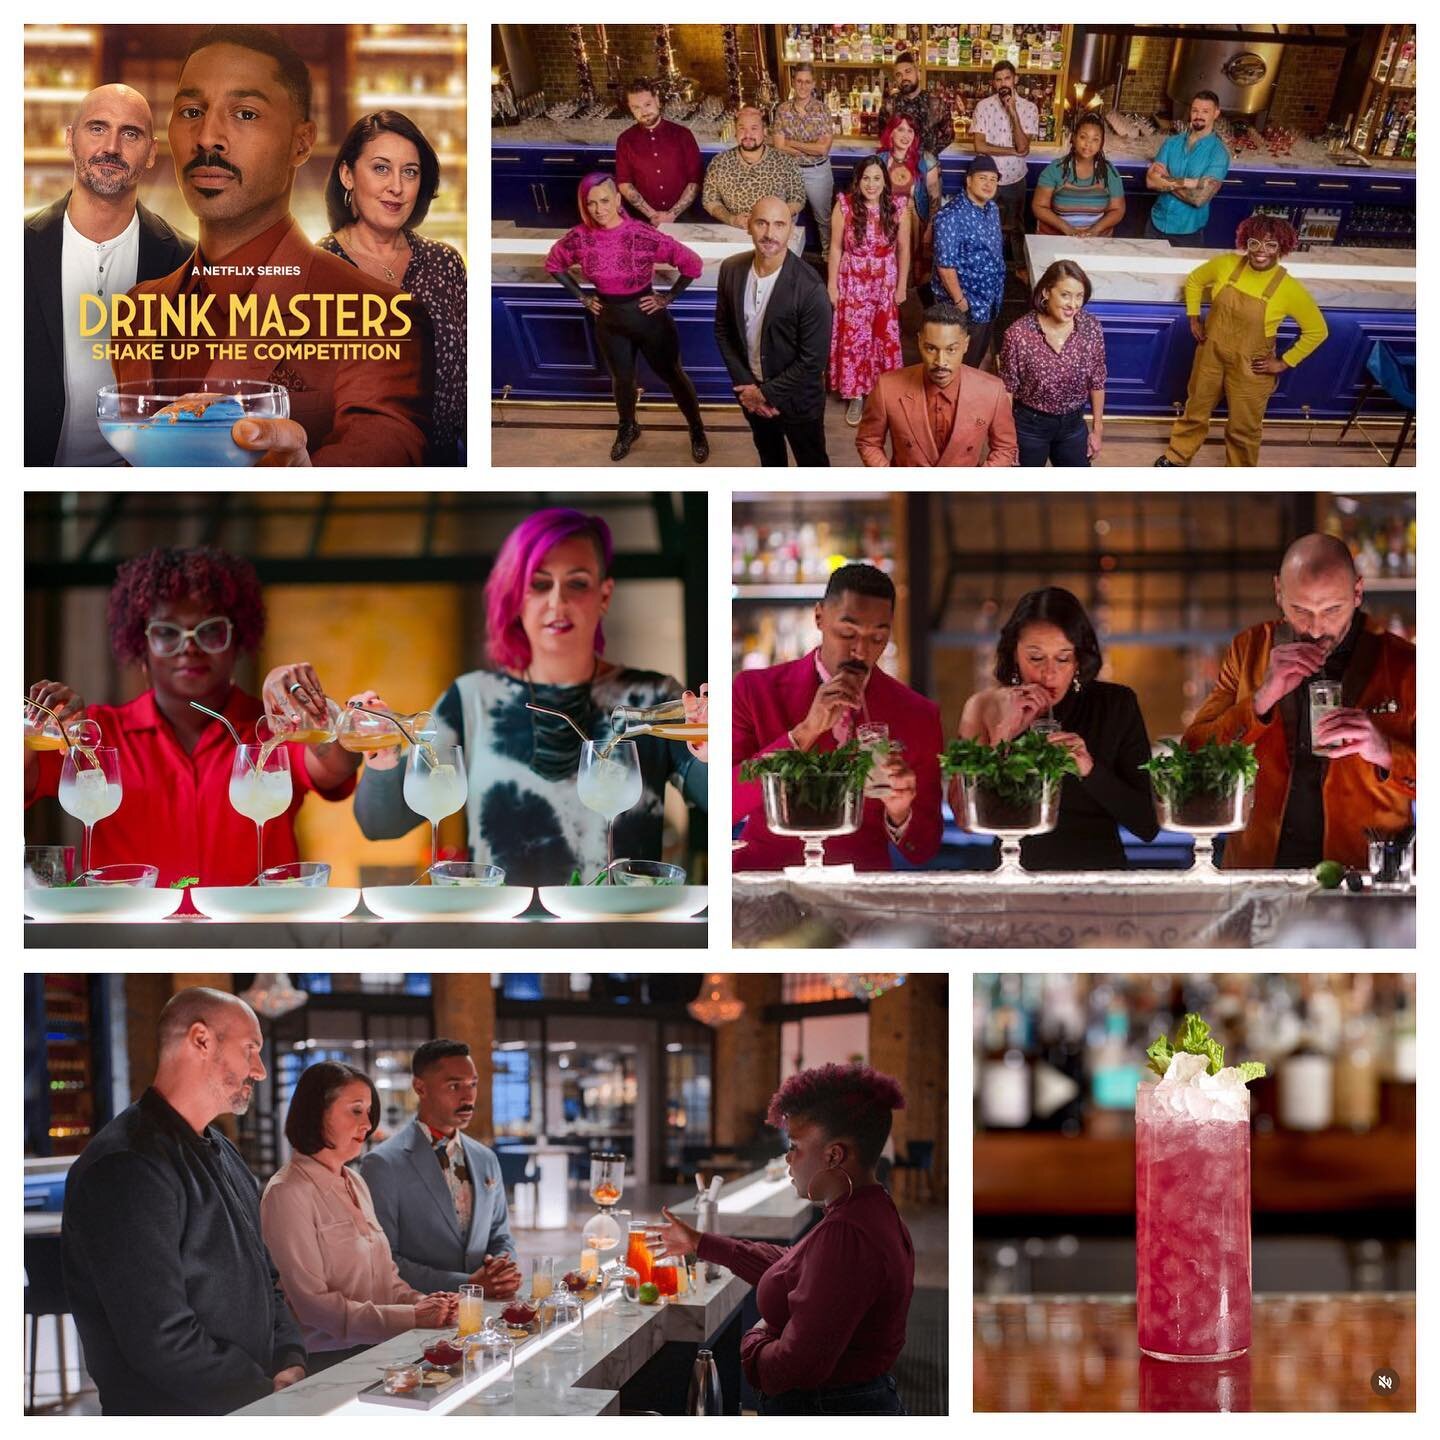 🧨📺🧨 NETFLIX SPOILER ALERT🧨📺🧨

If you haven&rsquo;t seen the Netflix series Drink Masters, stop reading and go watch it. We are going to reveal the winner so here&rsquo;s your last chance to stop reading before we tell you who won.

Drink Master